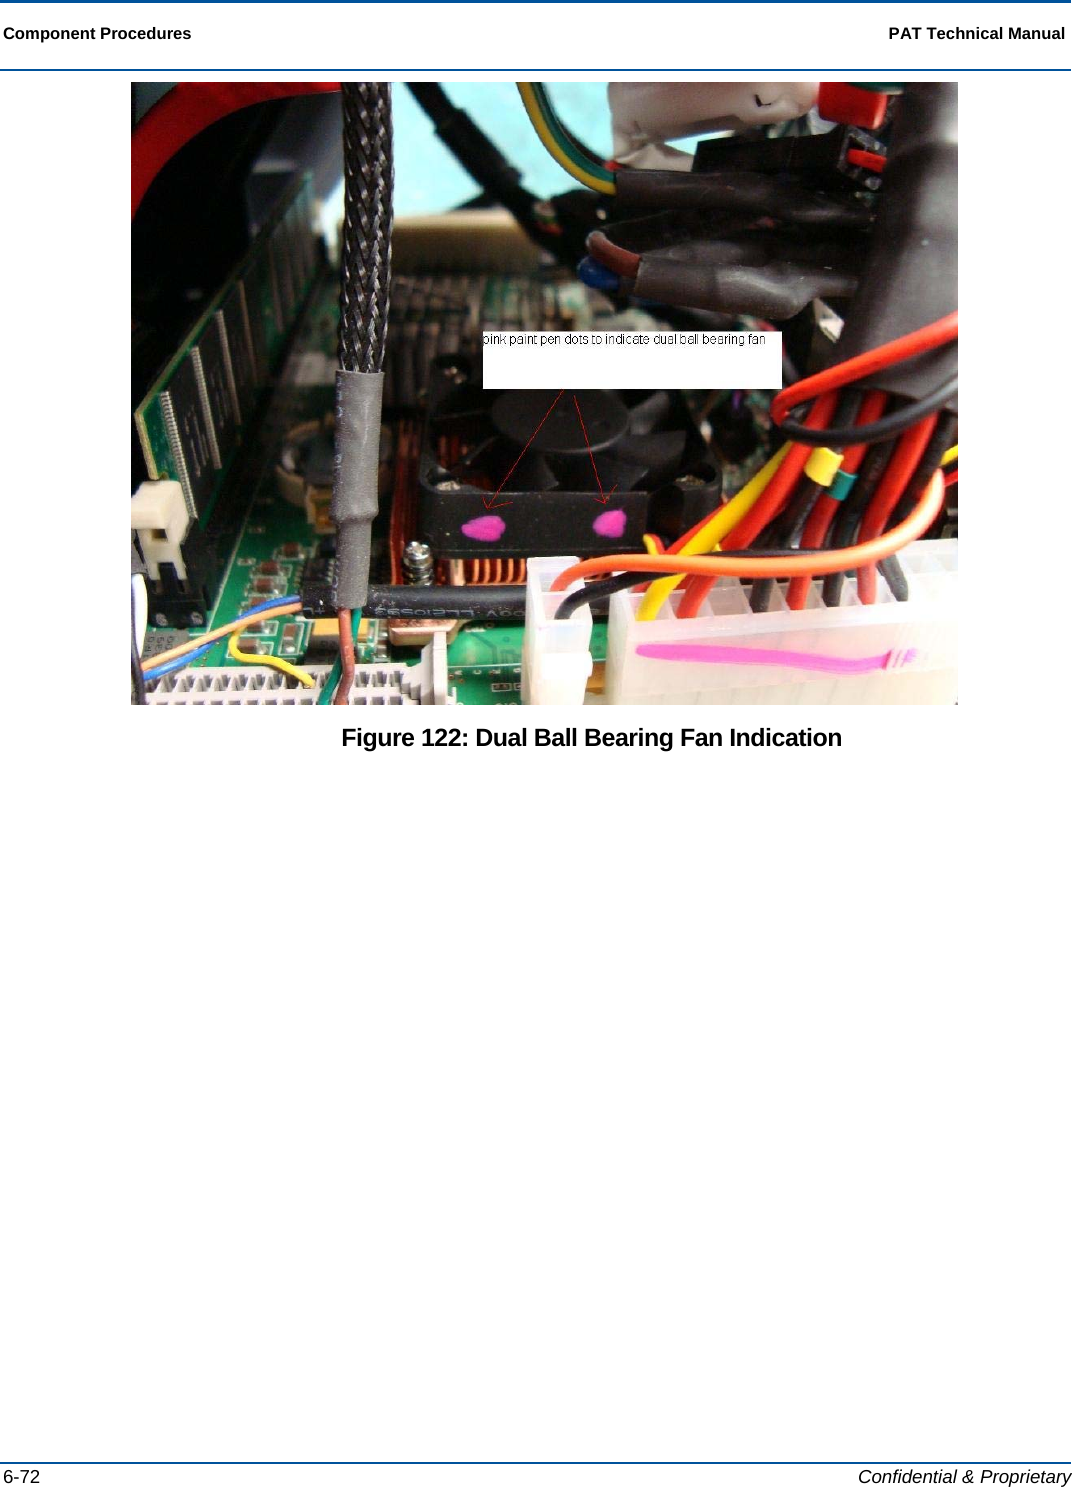  Component Procedures  PAT Technical Manual  6-72  Confidential &amp; Proprietary  Figure 122: Dual Ball Bearing Fan Indication  